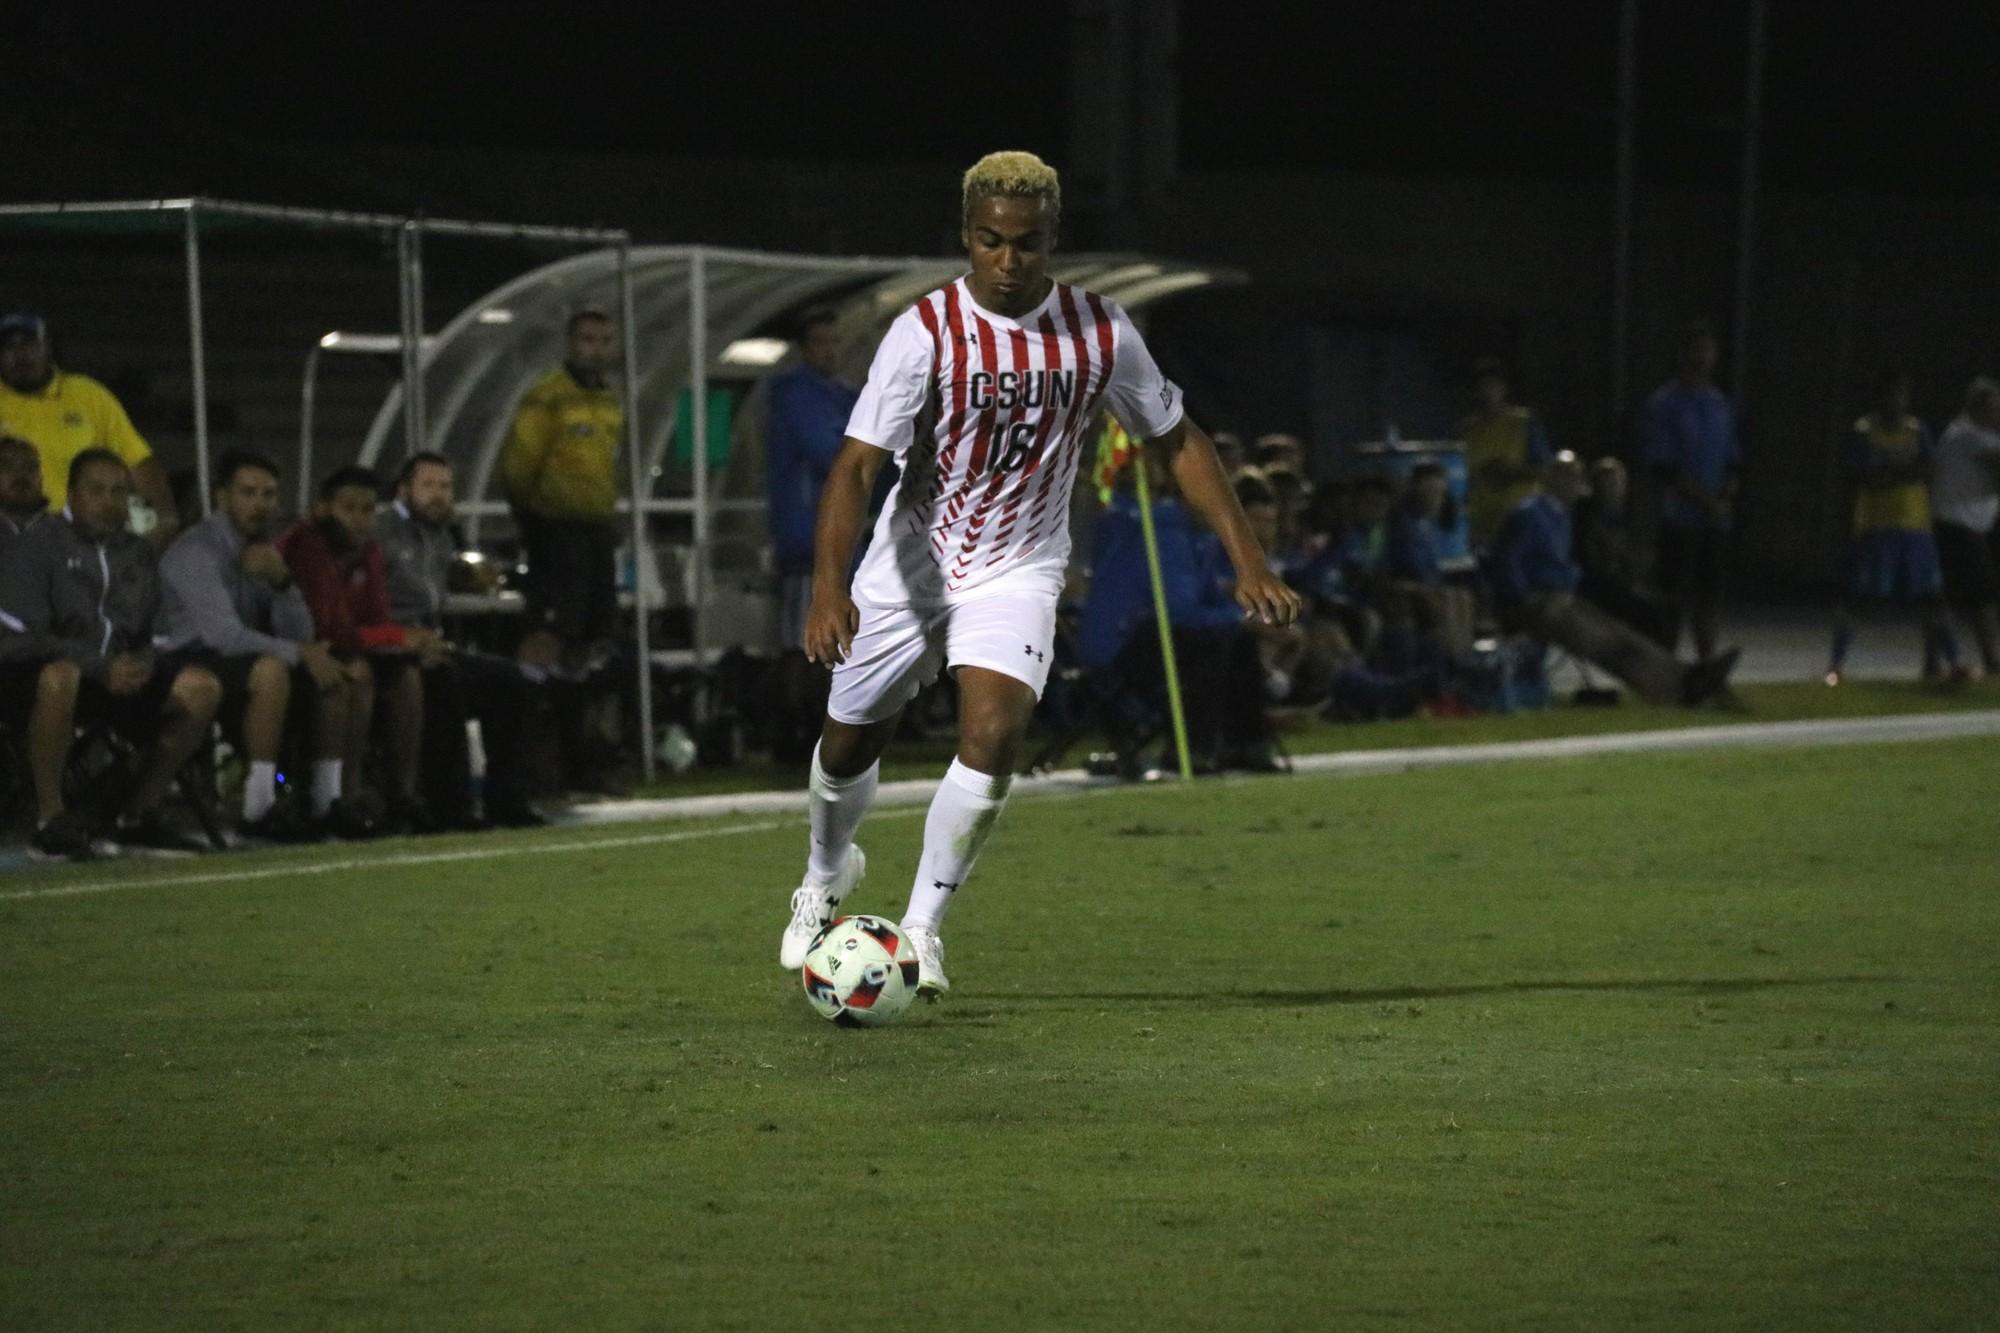 CSUN student takes control of the ball